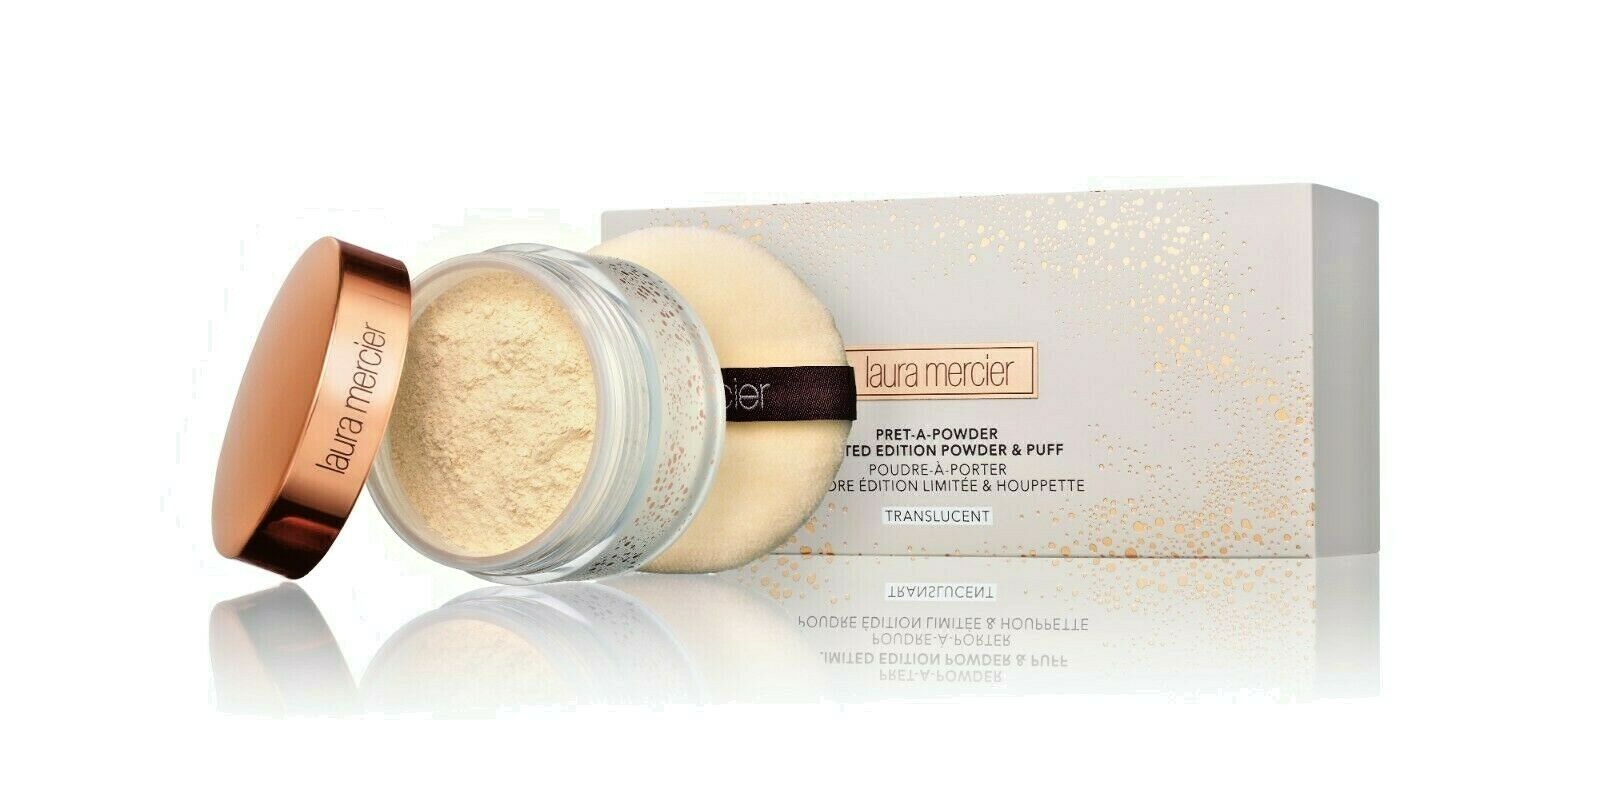 Primary image for Laura Mercier - Limited Edittion Powder & Puff  Translucent   Brand New in Box !